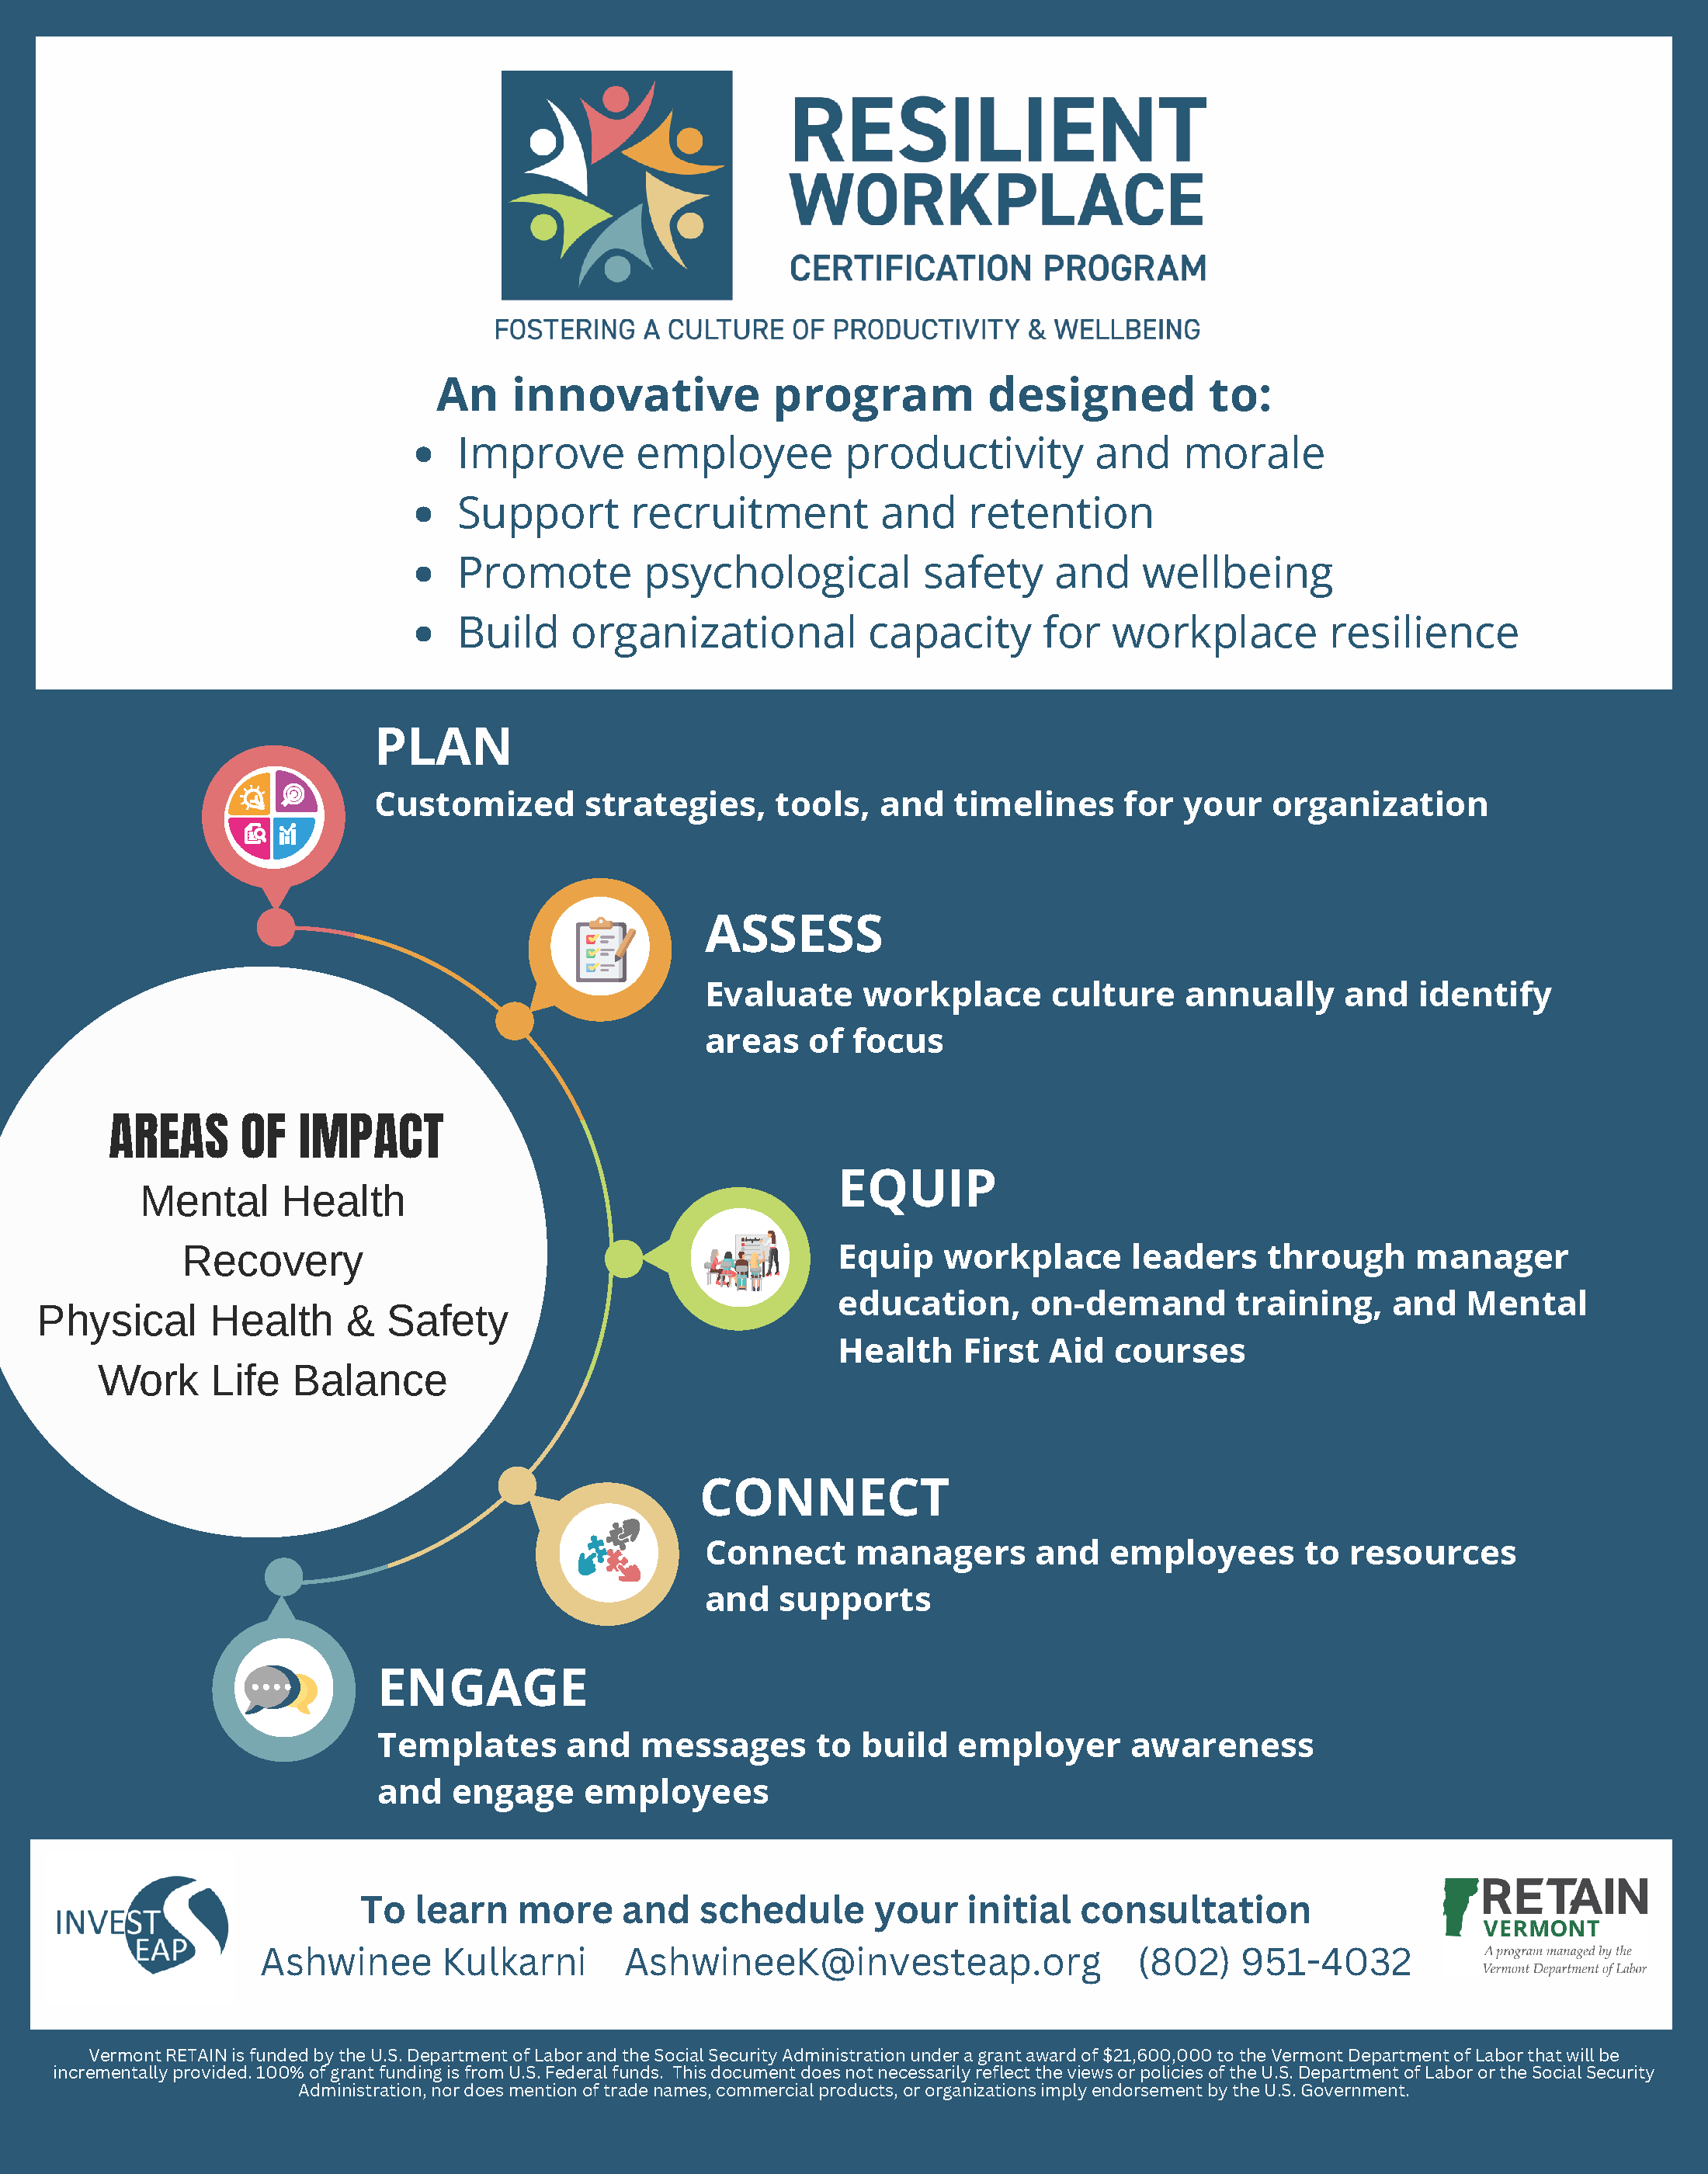 A poster with points about the Resilient Workplace Certification Program